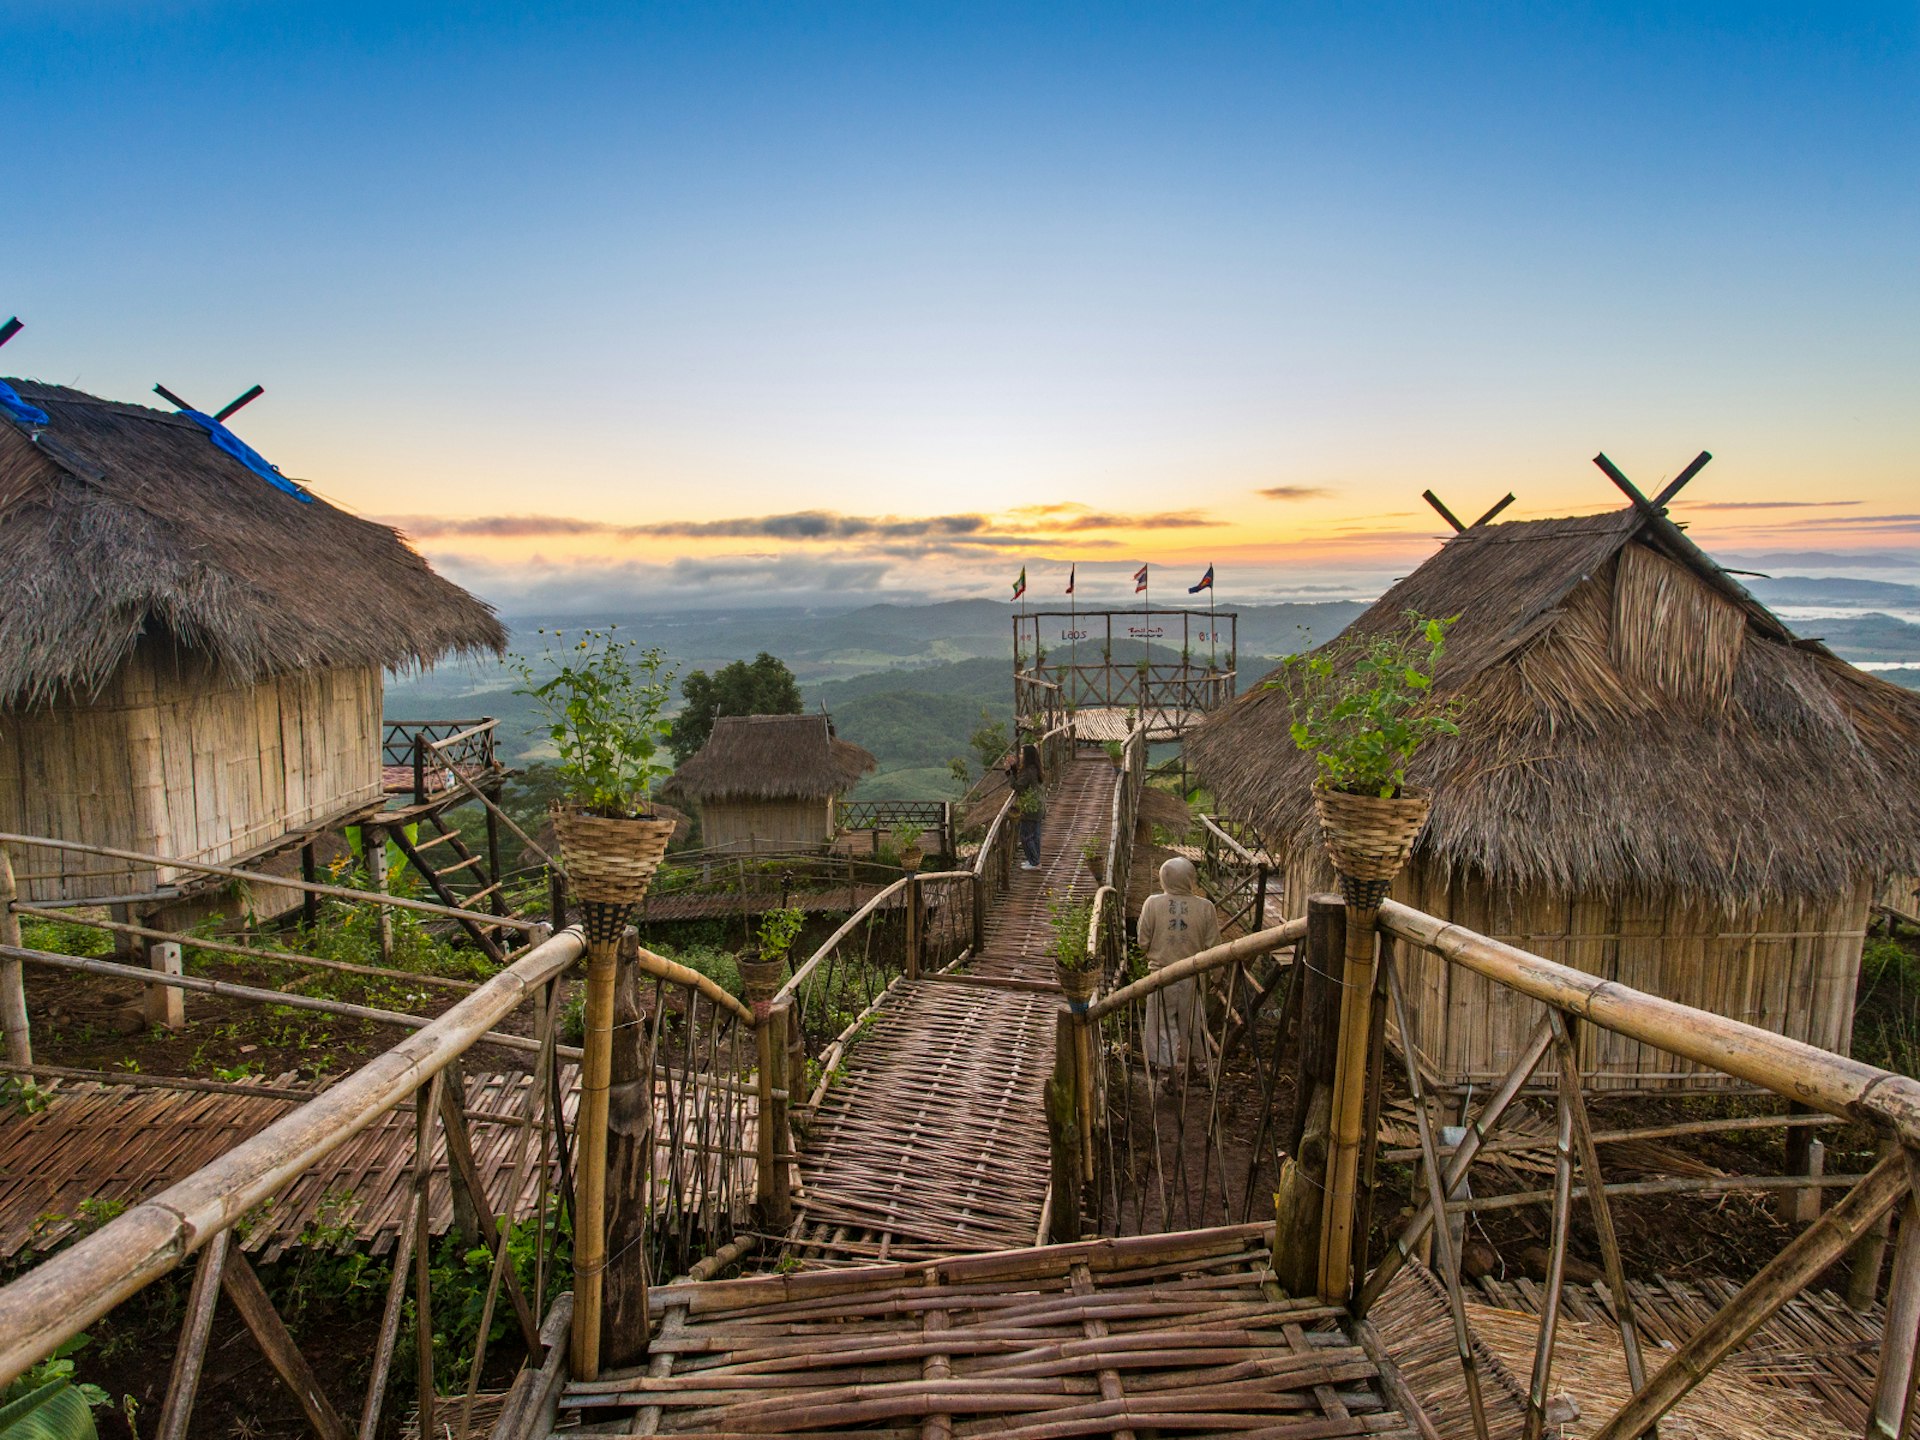 Viewpoint in Chiang Rai made of wooden walkways, with two wooden houses on stilts, overlooking Thailand's Golden Triangle 